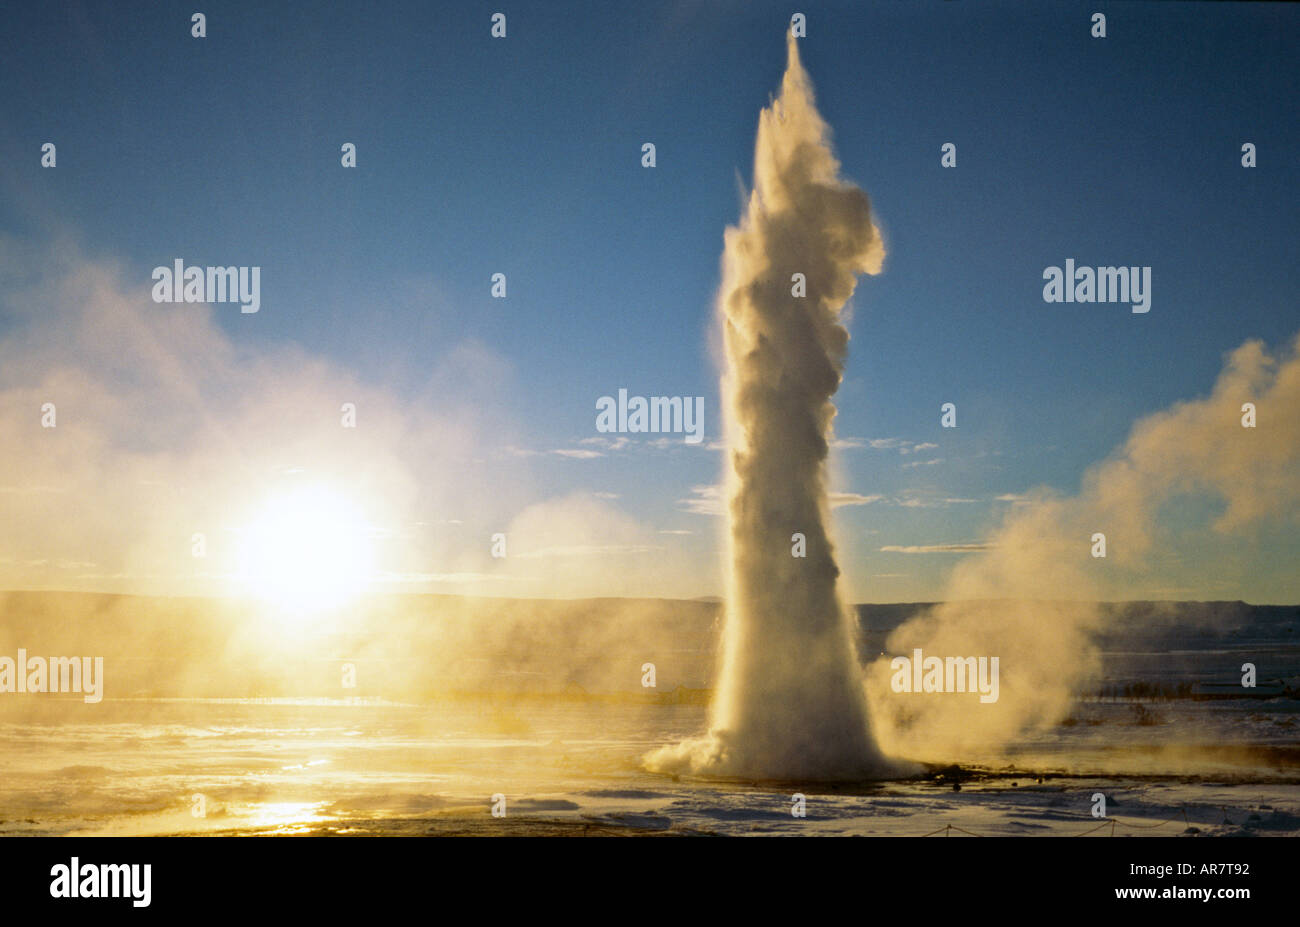 Strokkur geyser, in Haukadalur geothermal area, erupting and spouting its water 21 meters into the air, during a winter sunrise in Geysir, Iceland Stock Photo